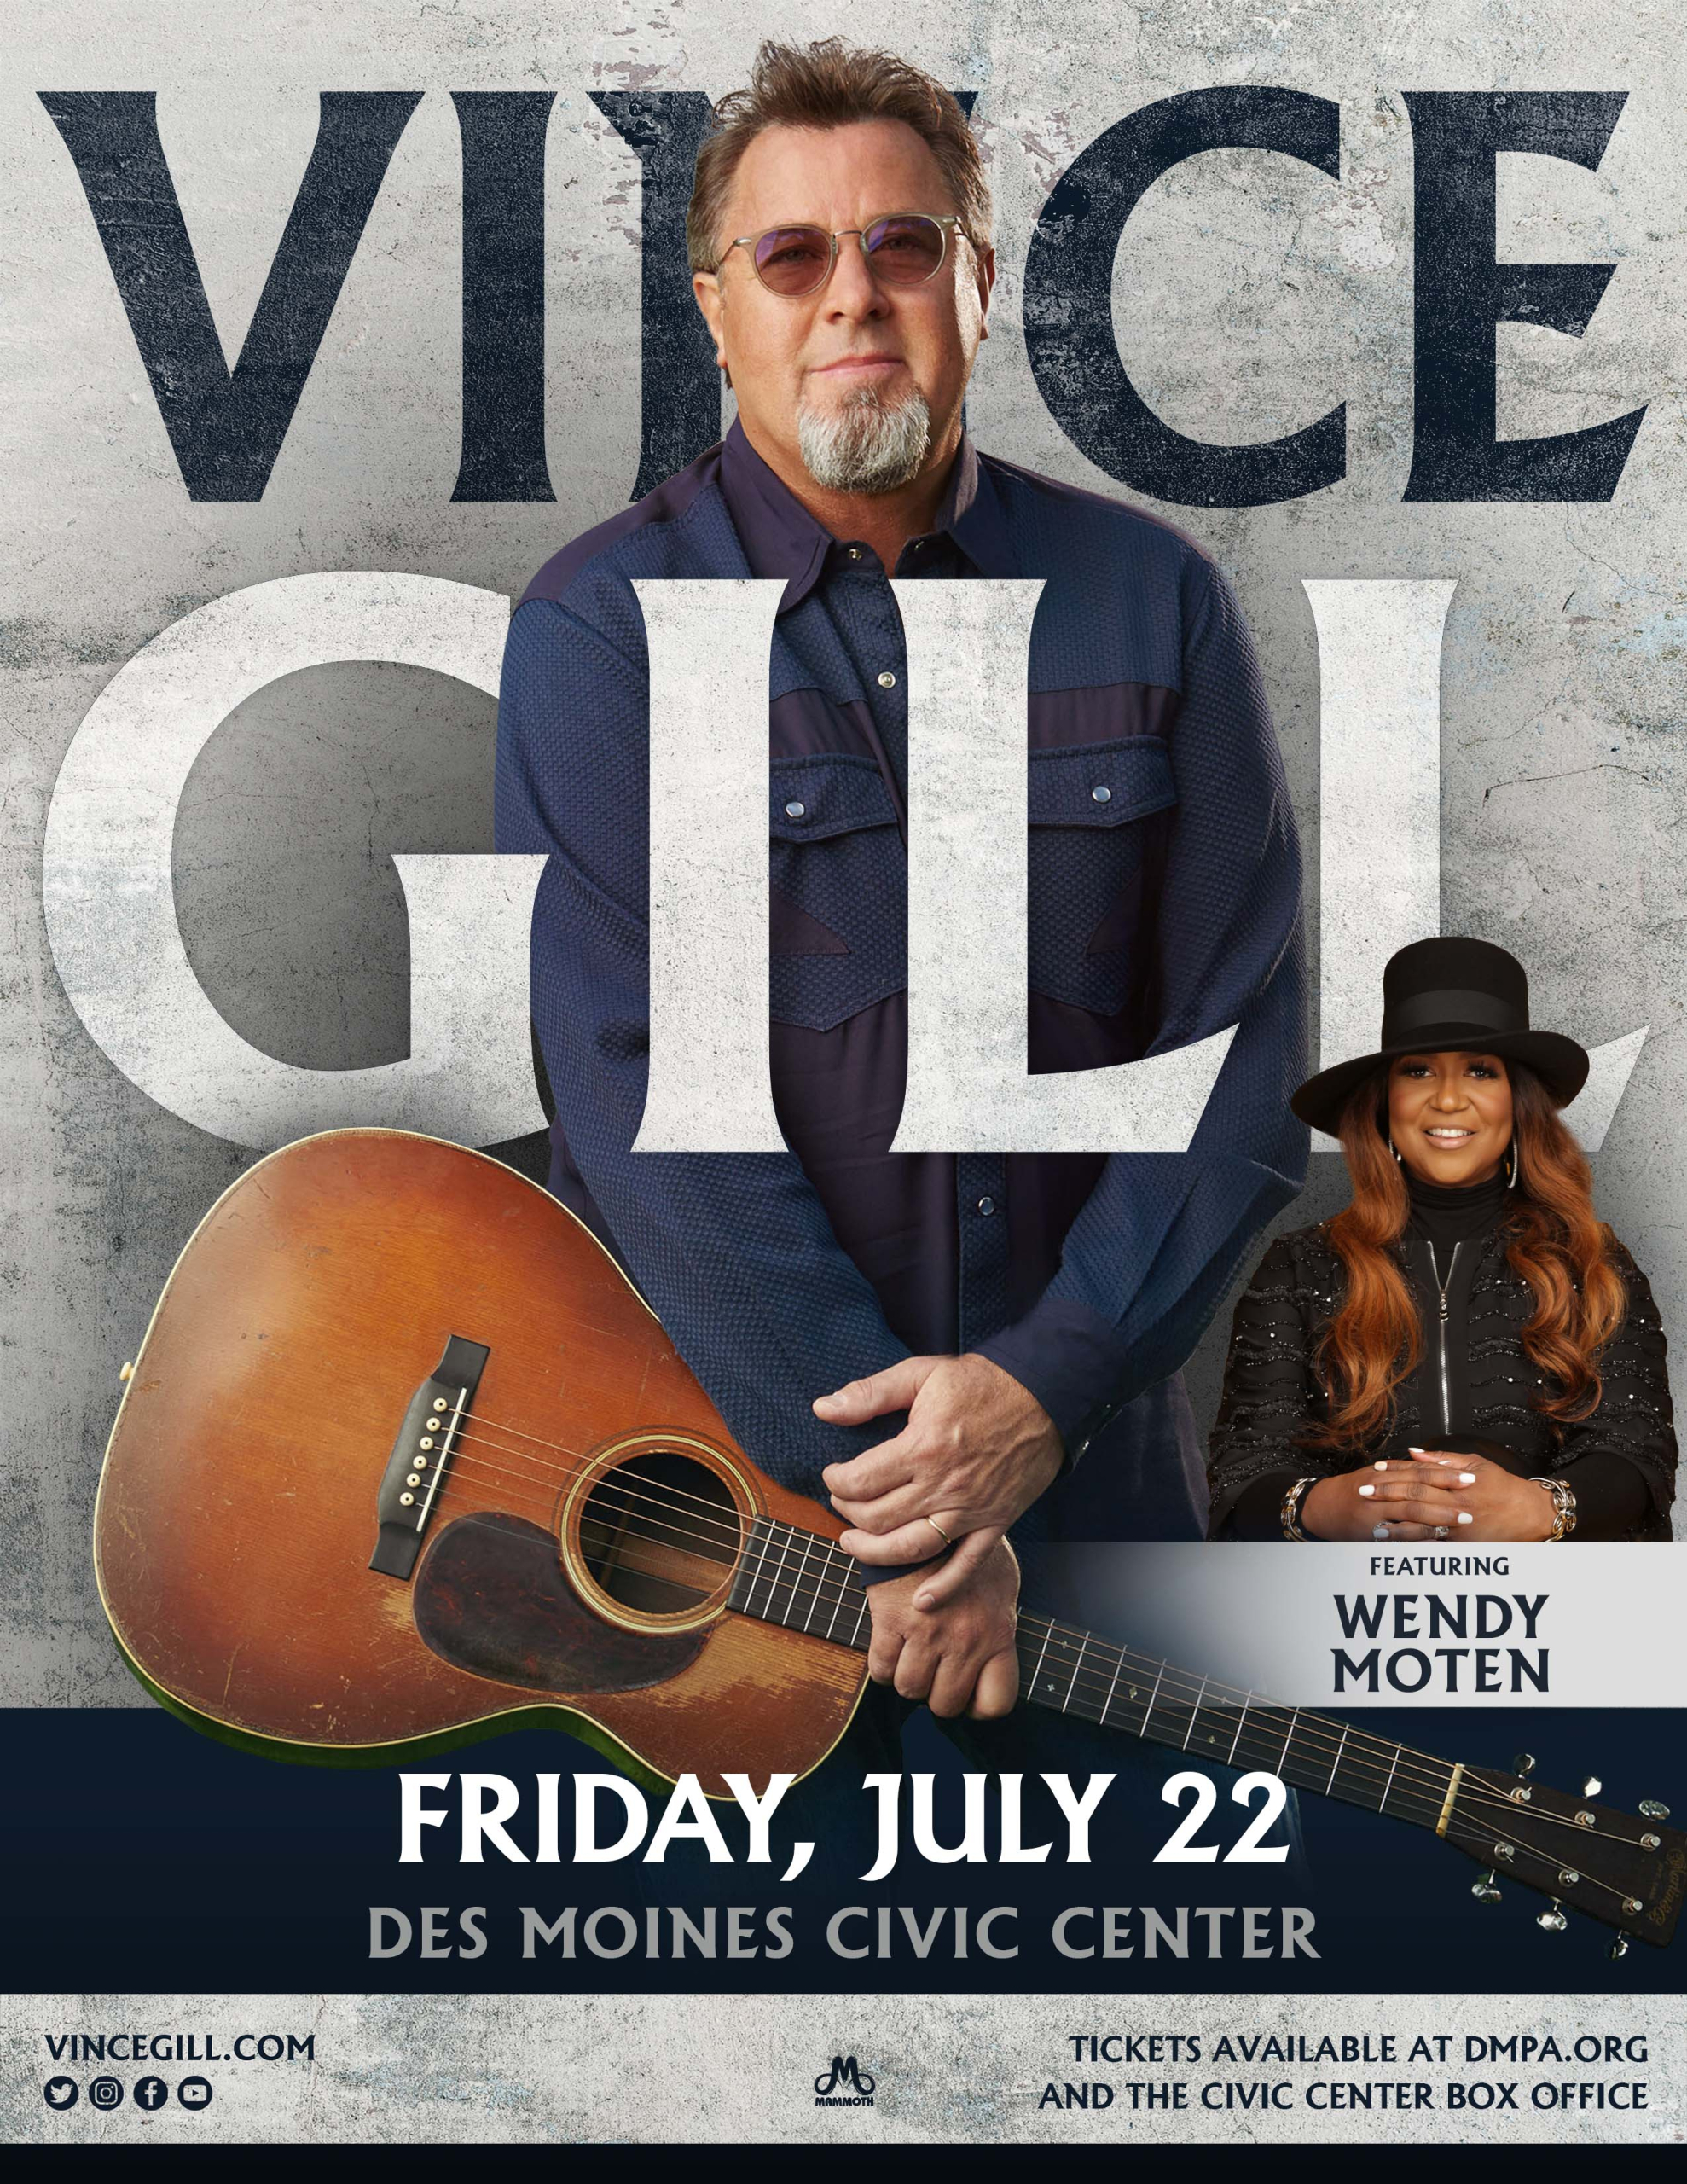 Enter to Win Tickets to Vince Gill at the Des Moines Civic Center!